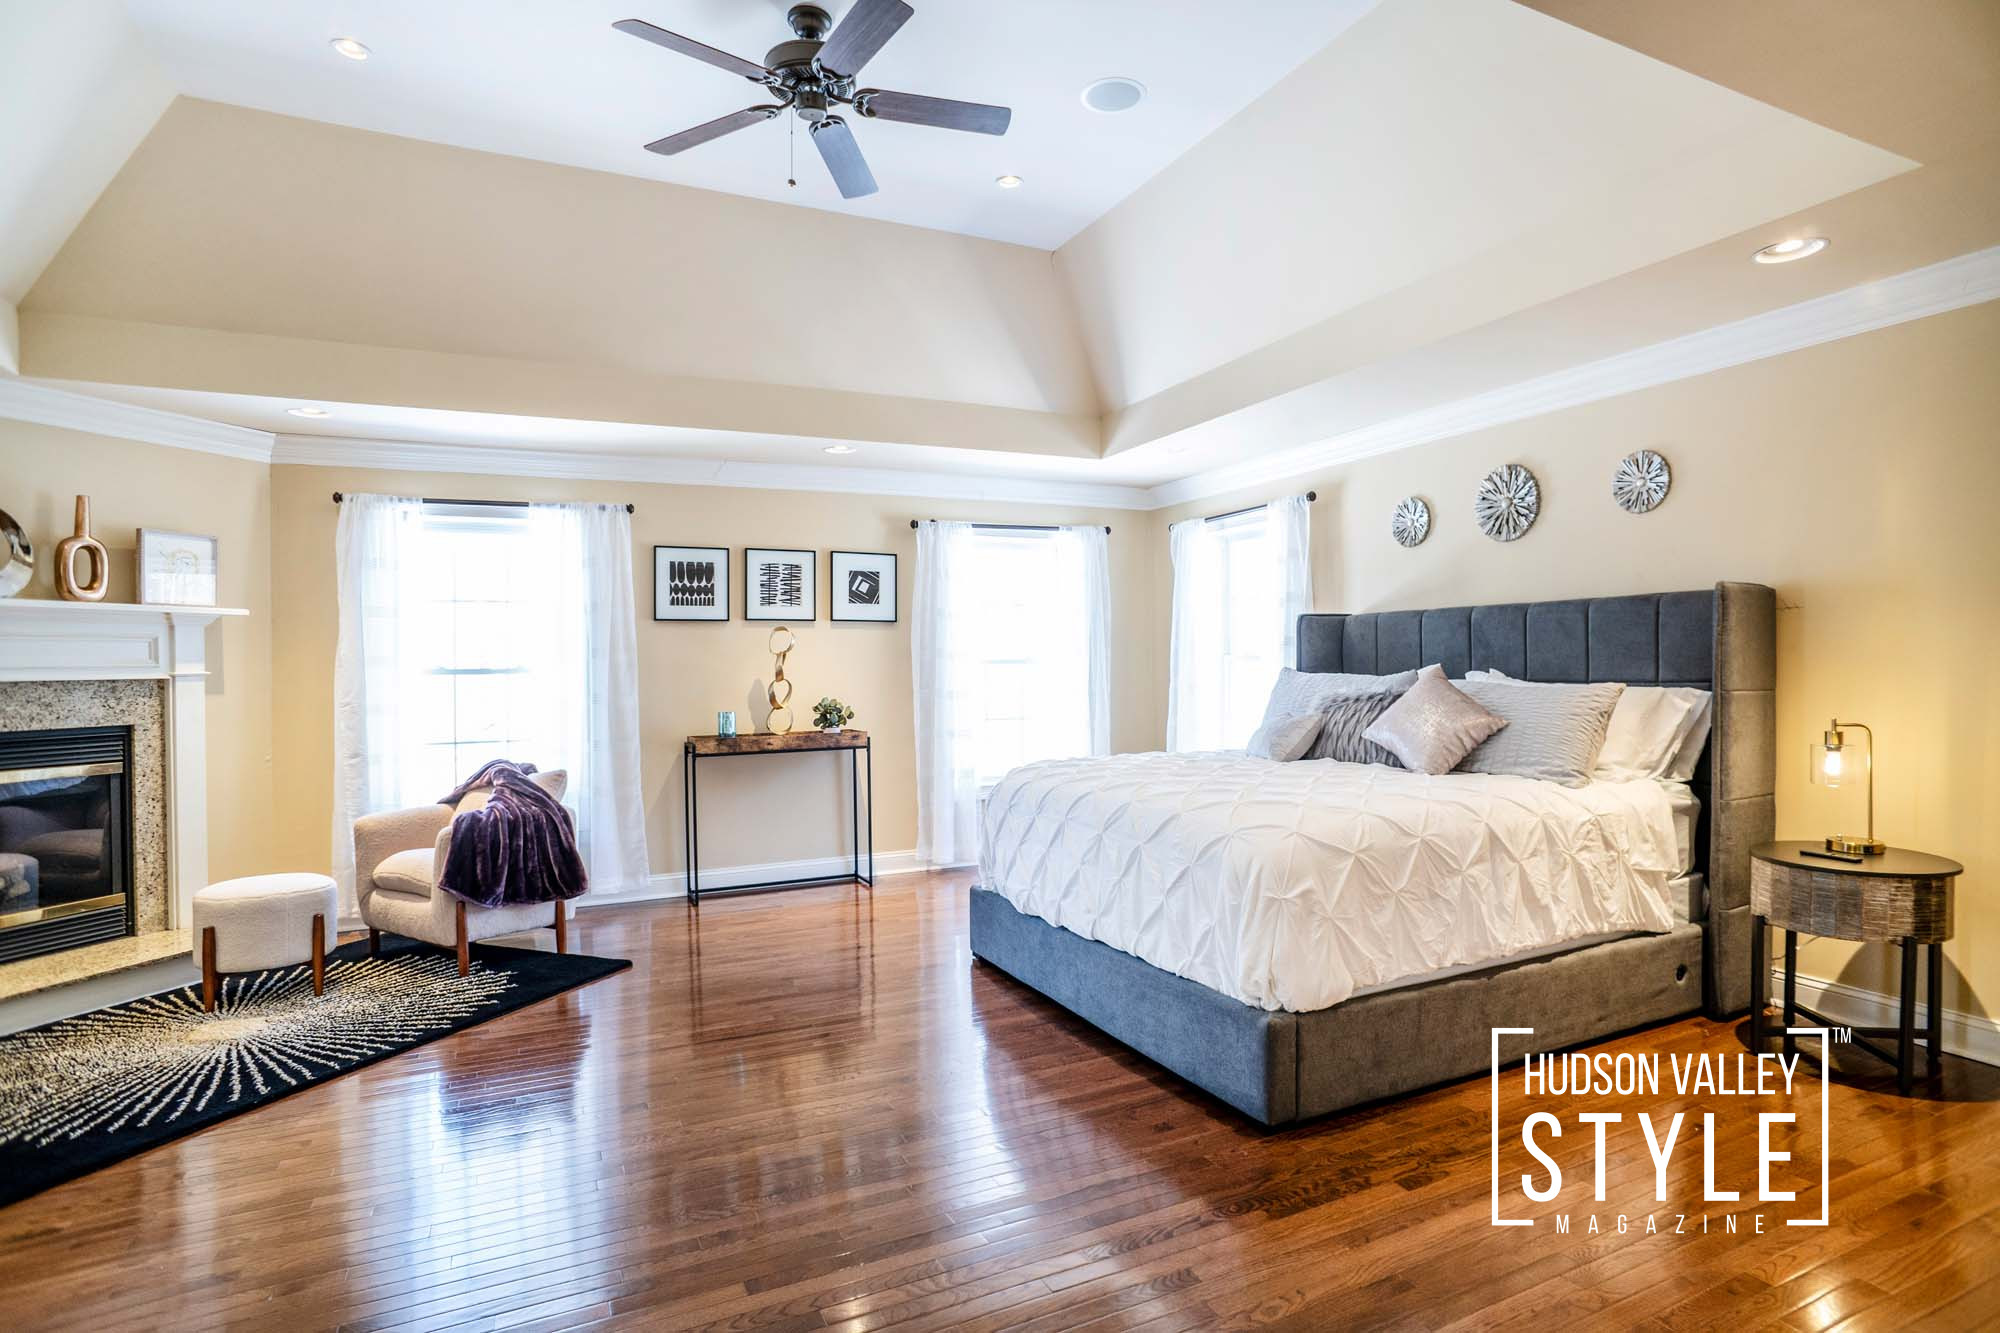 Hudson Valley Style Photo Gallery: Brand New Airbnb Experience – Presented by Alluvion Real Estate – Photographer Maxwell Alexander – Duncan Avenue Studios for the Alluvion Real Estate